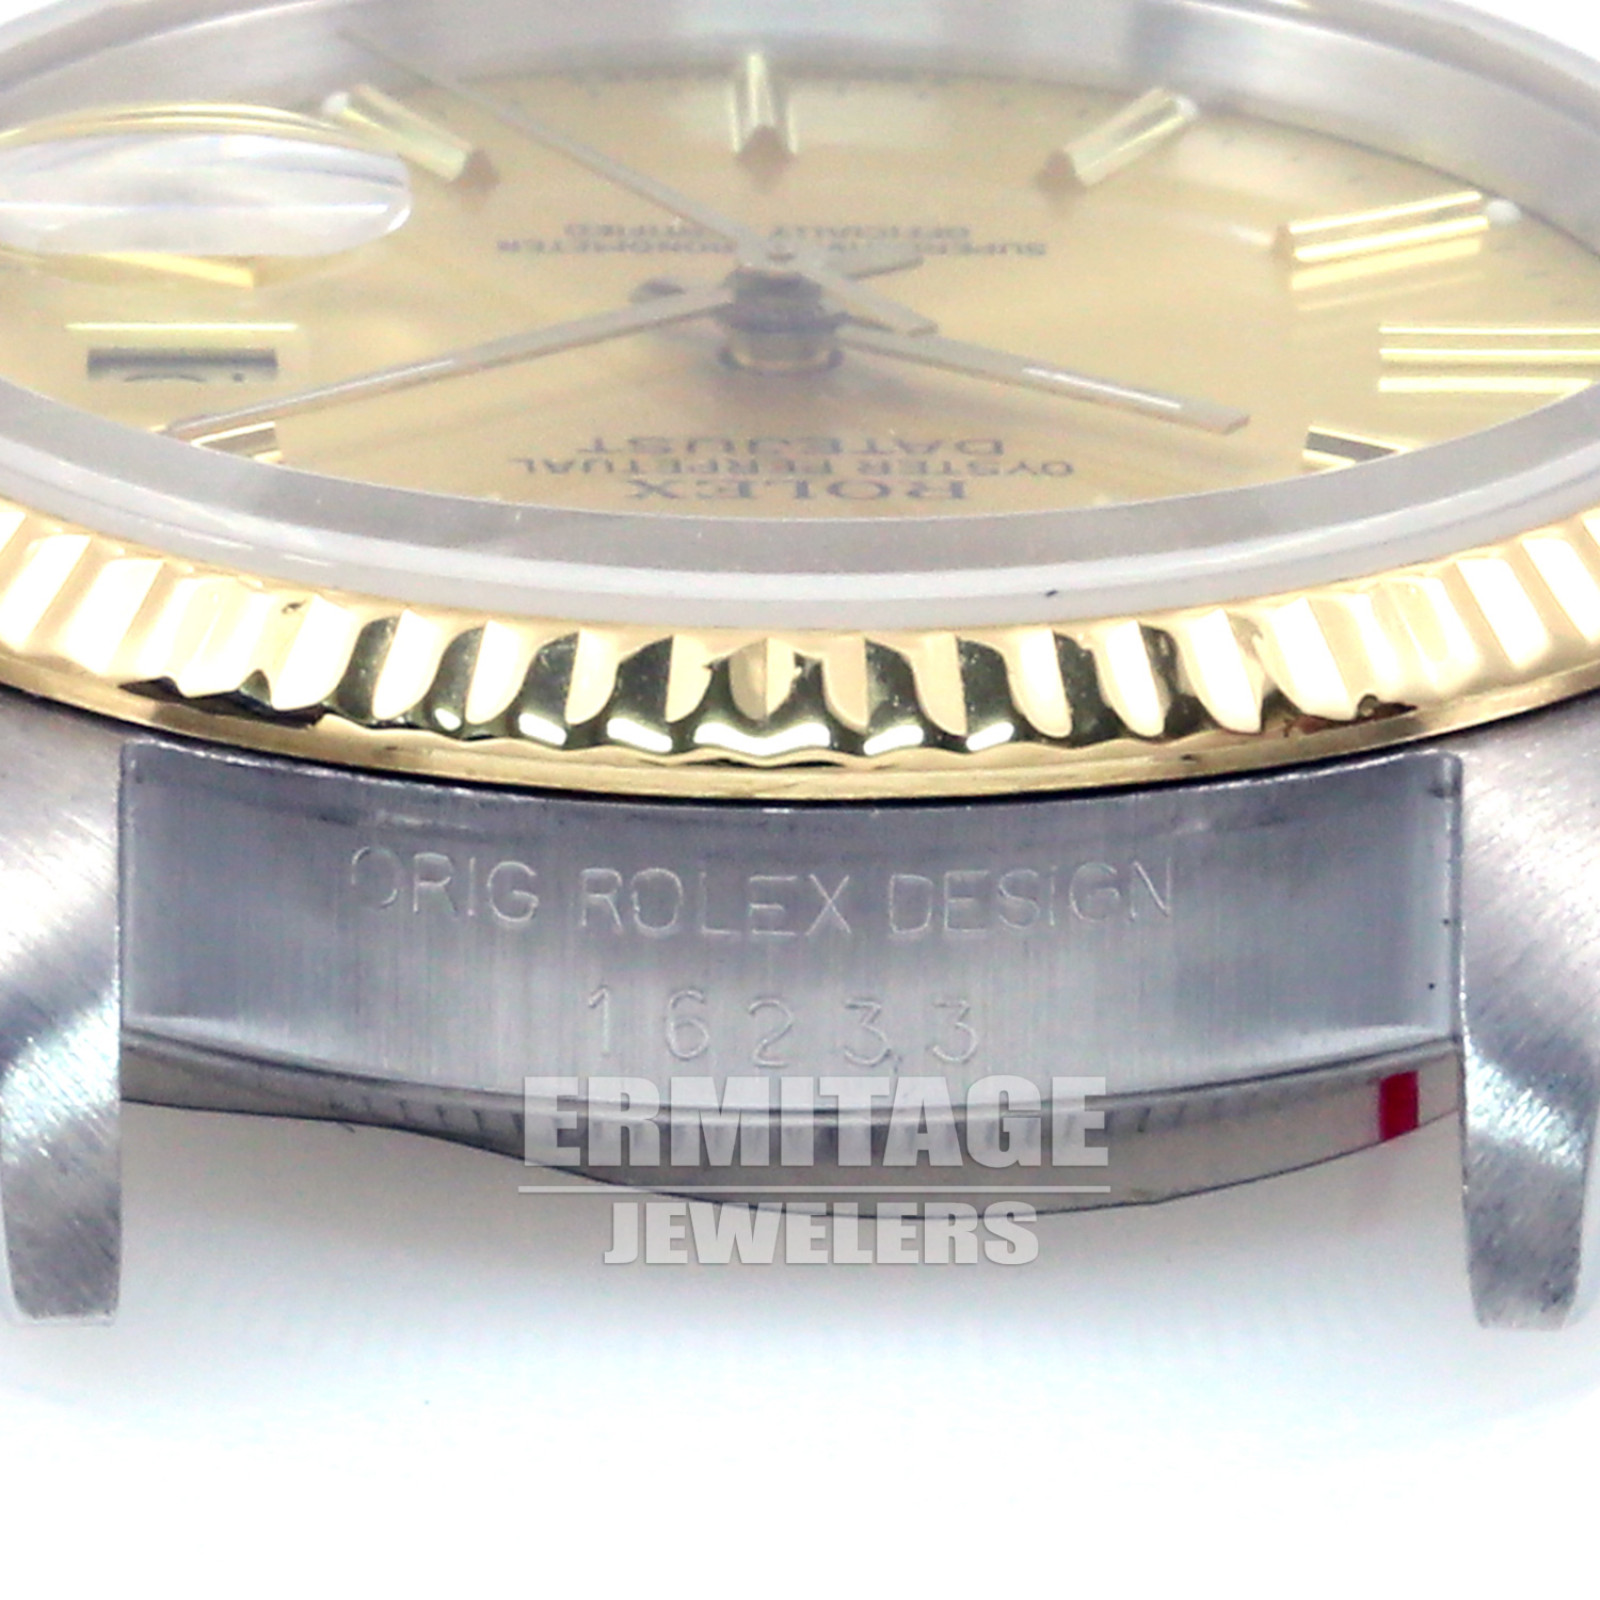 Pre-Owned Rolex Datejust 16233 with Champagne Dial